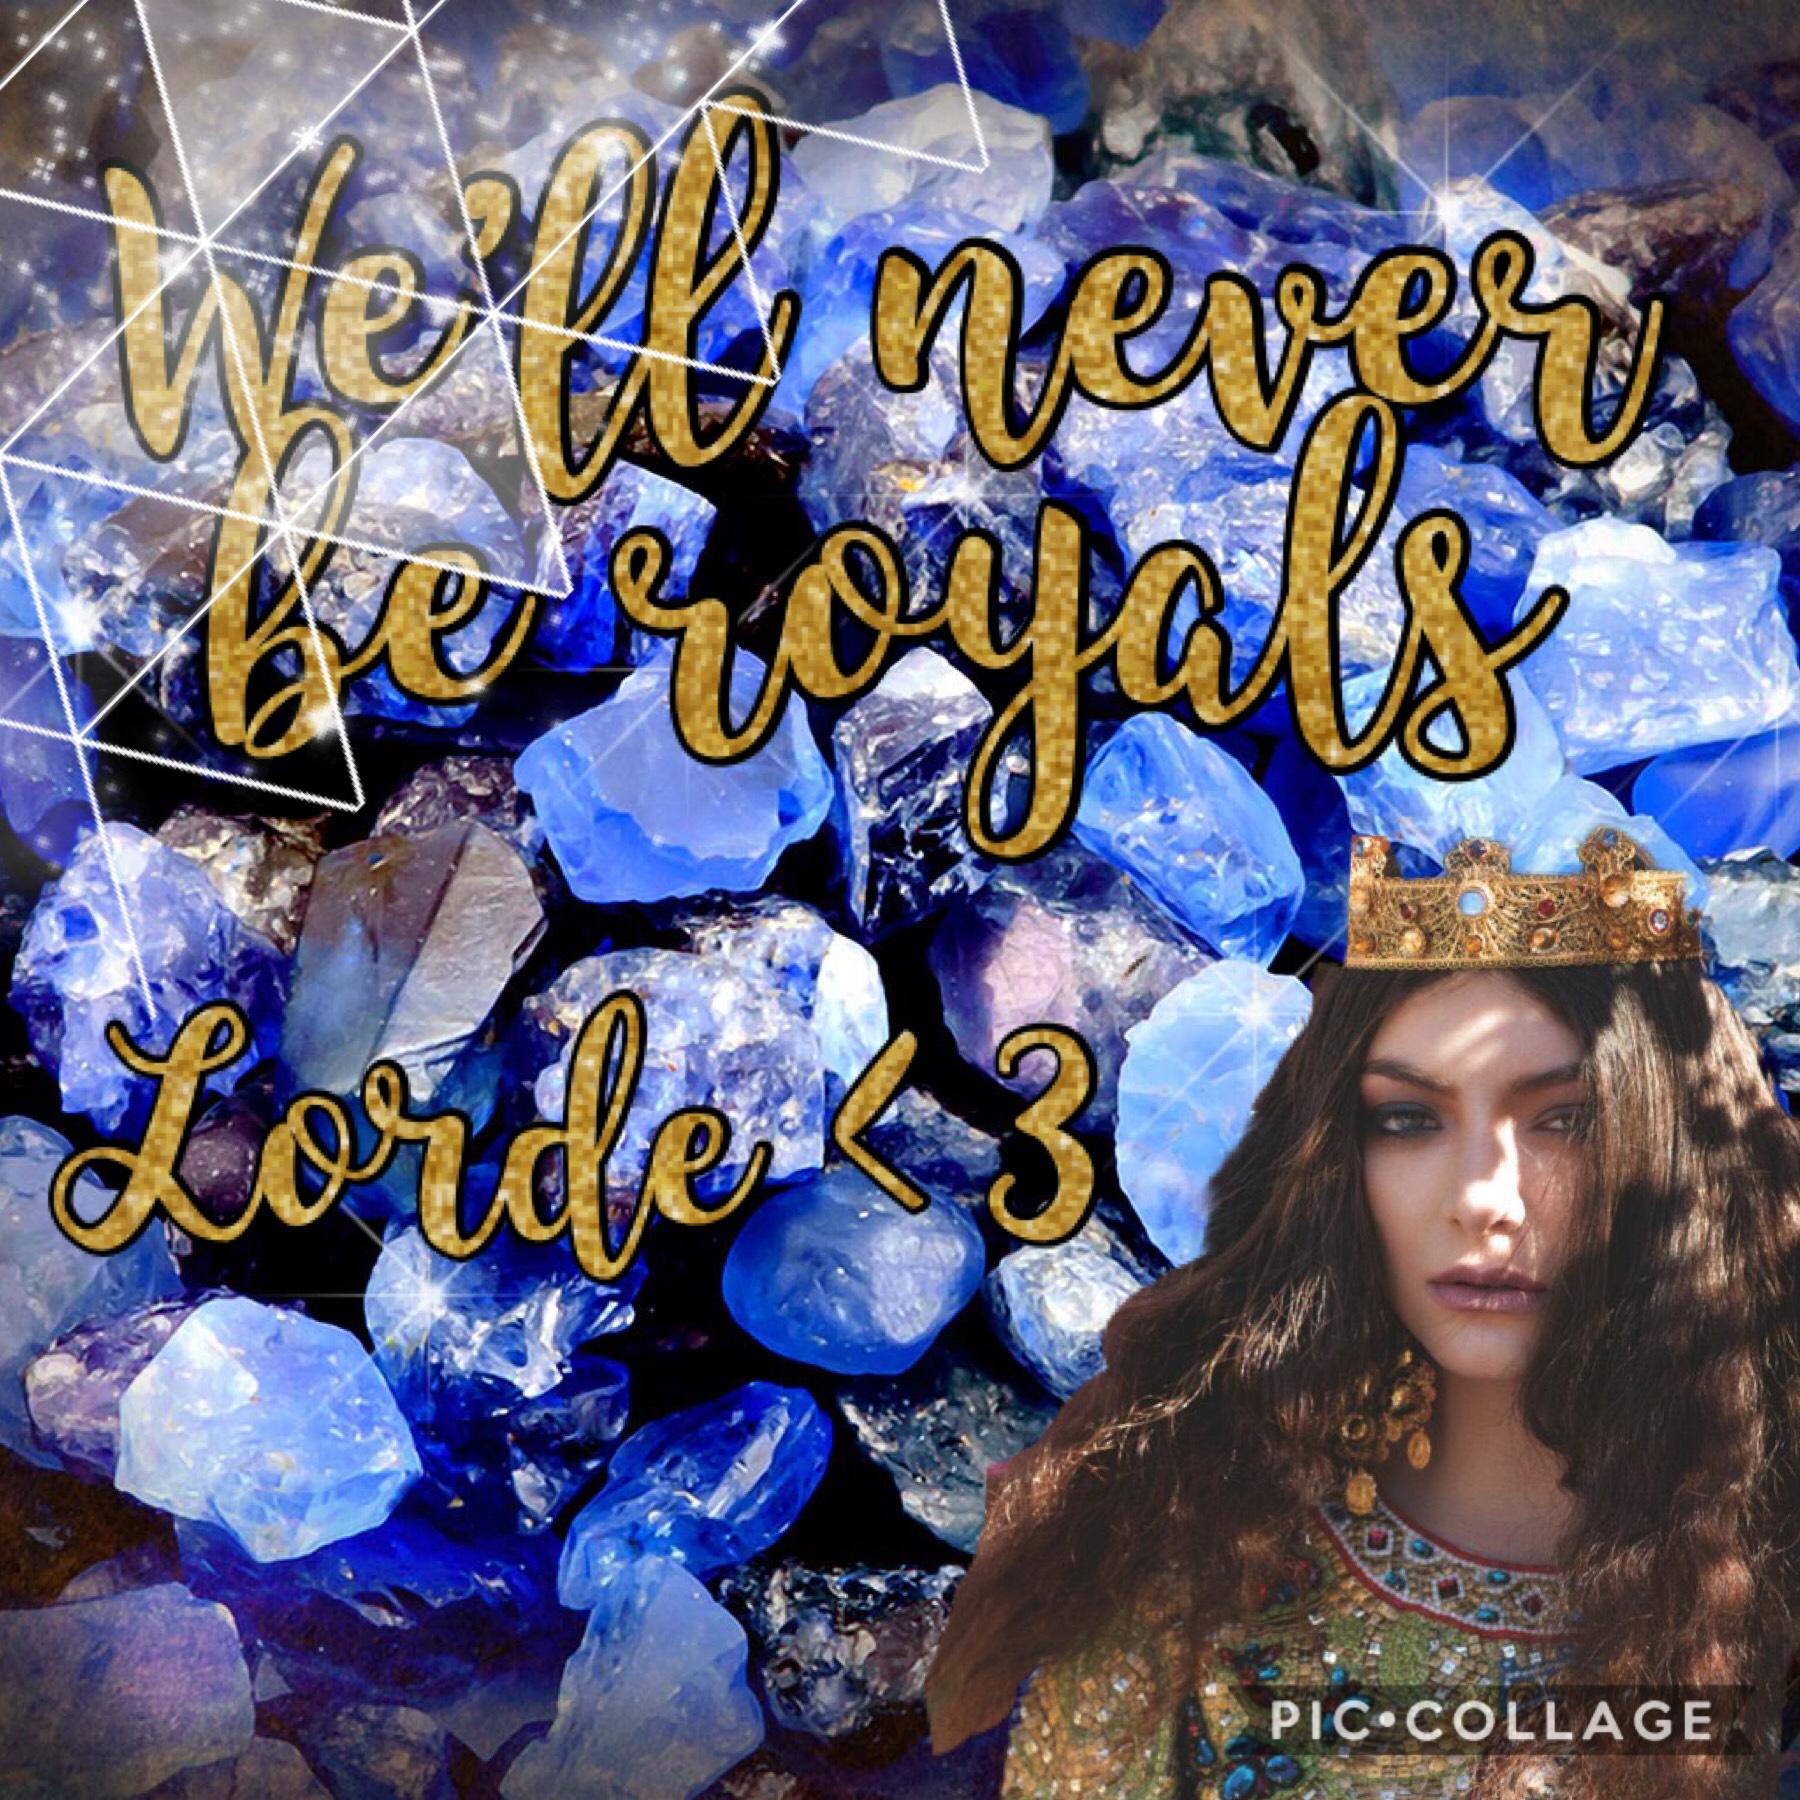 Lorde is one of my favorite singers to listen to!!! My favorite song is Royals!!! LOOK IT UP ITS SOOO GOOD!!!